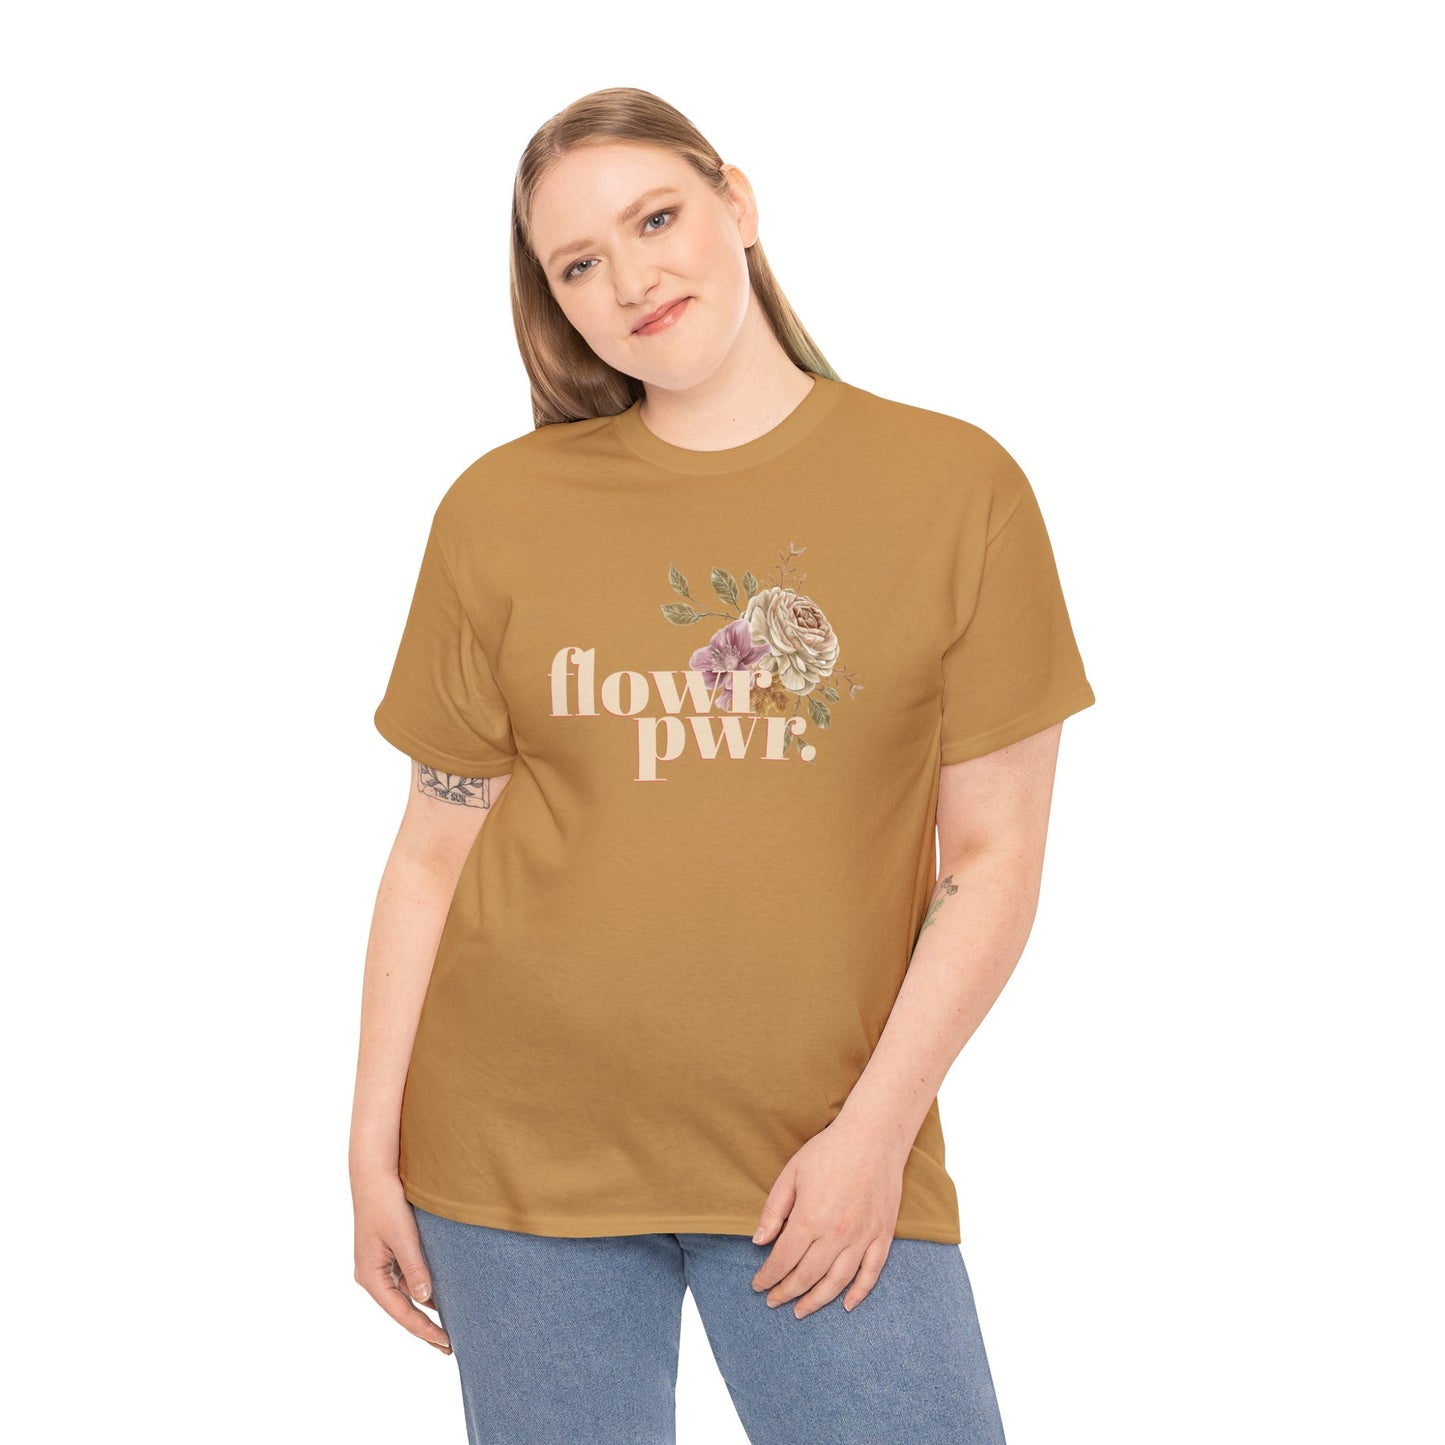 flowr powr.. florist graphic tee - EXPRESS DELIVERY